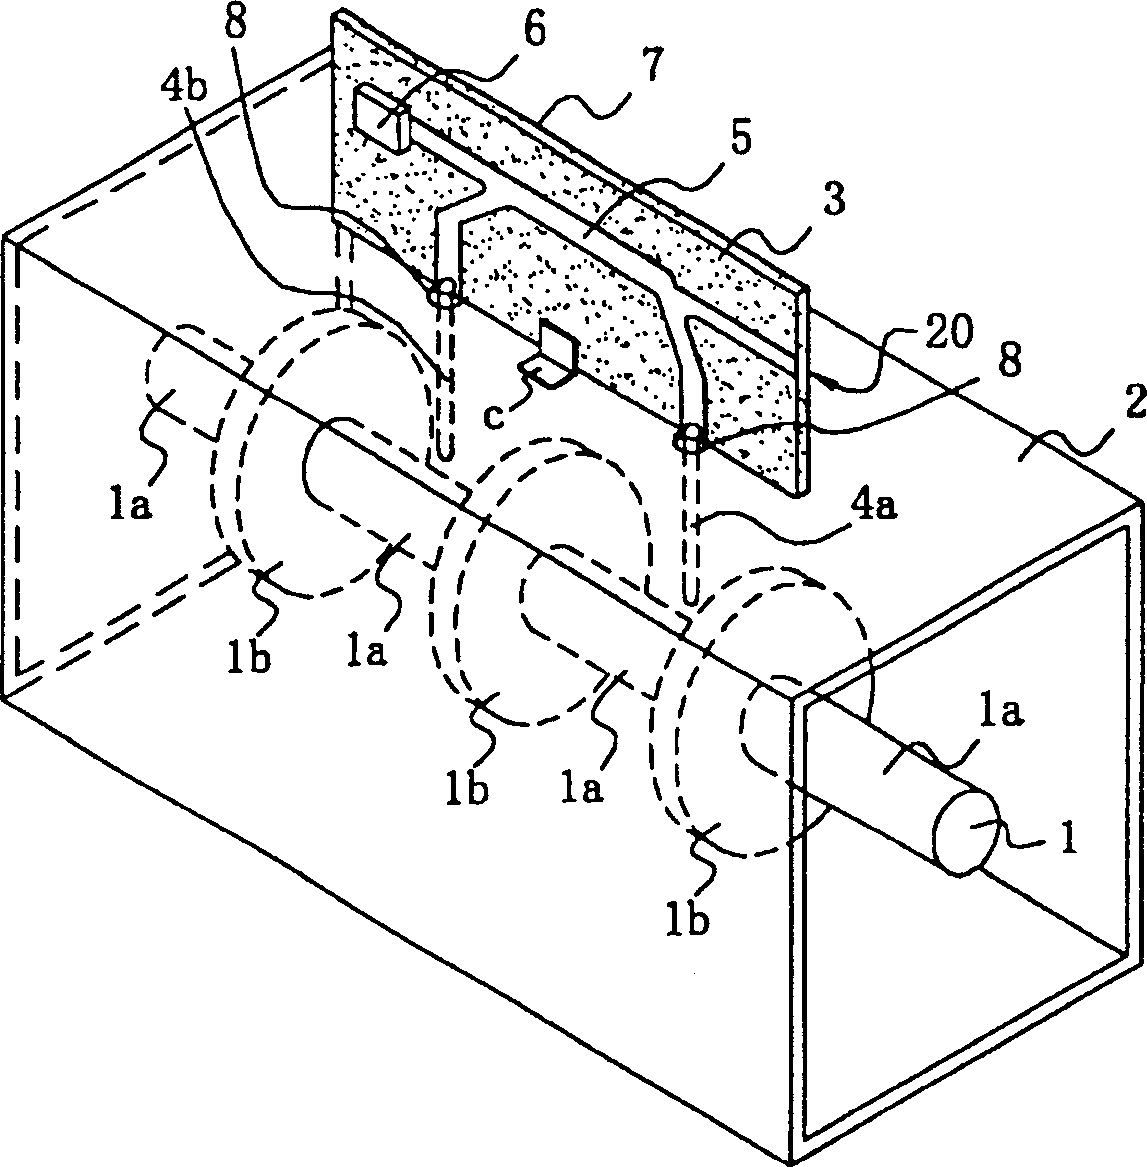 Filter having directional couplex and communication device